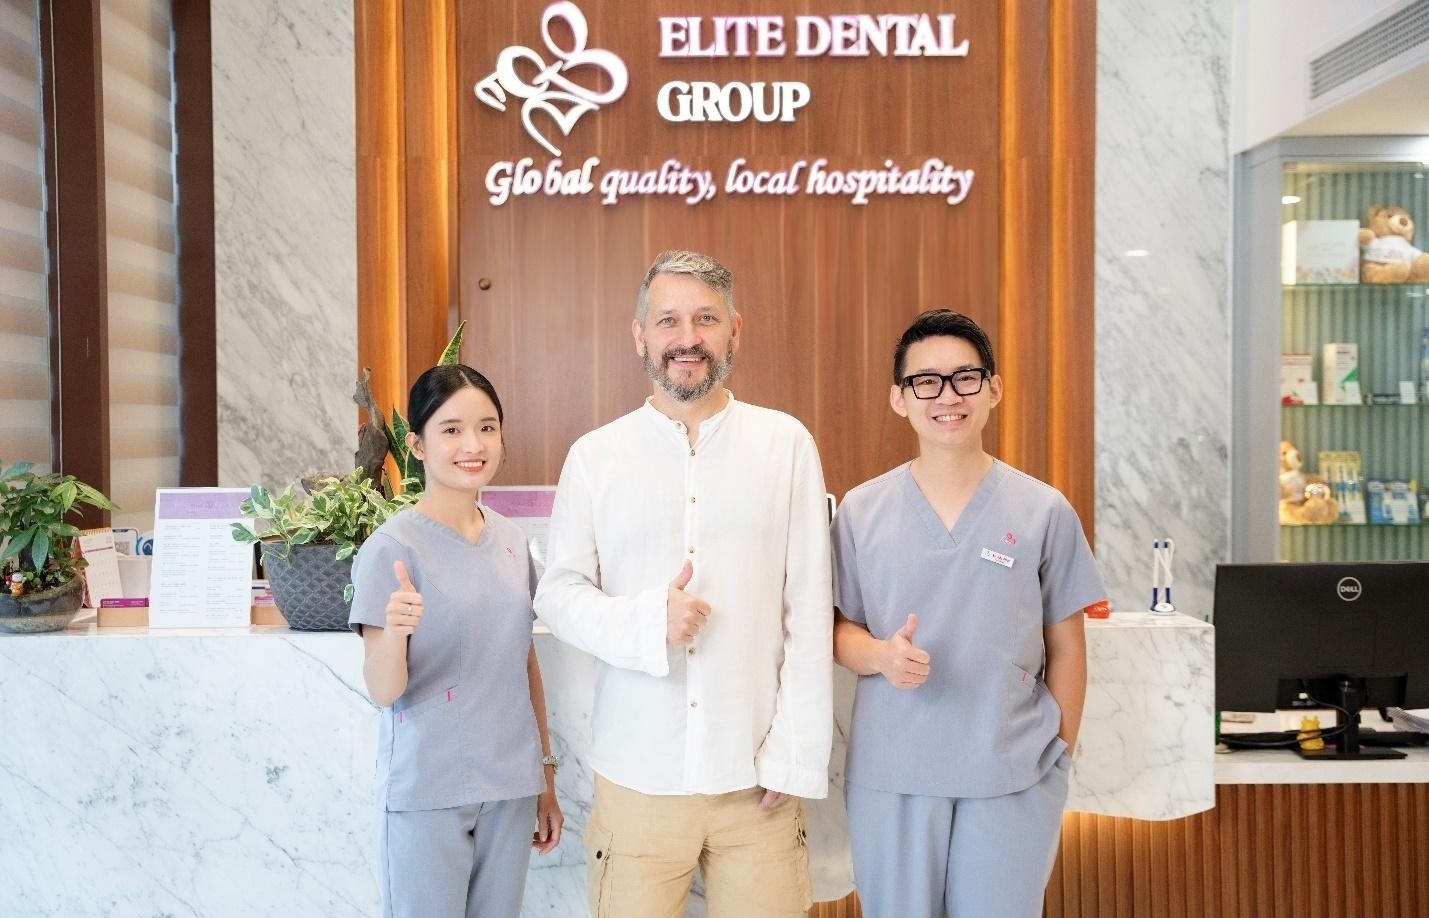 Why you should choose Elite Dental Centre as your dental specialist